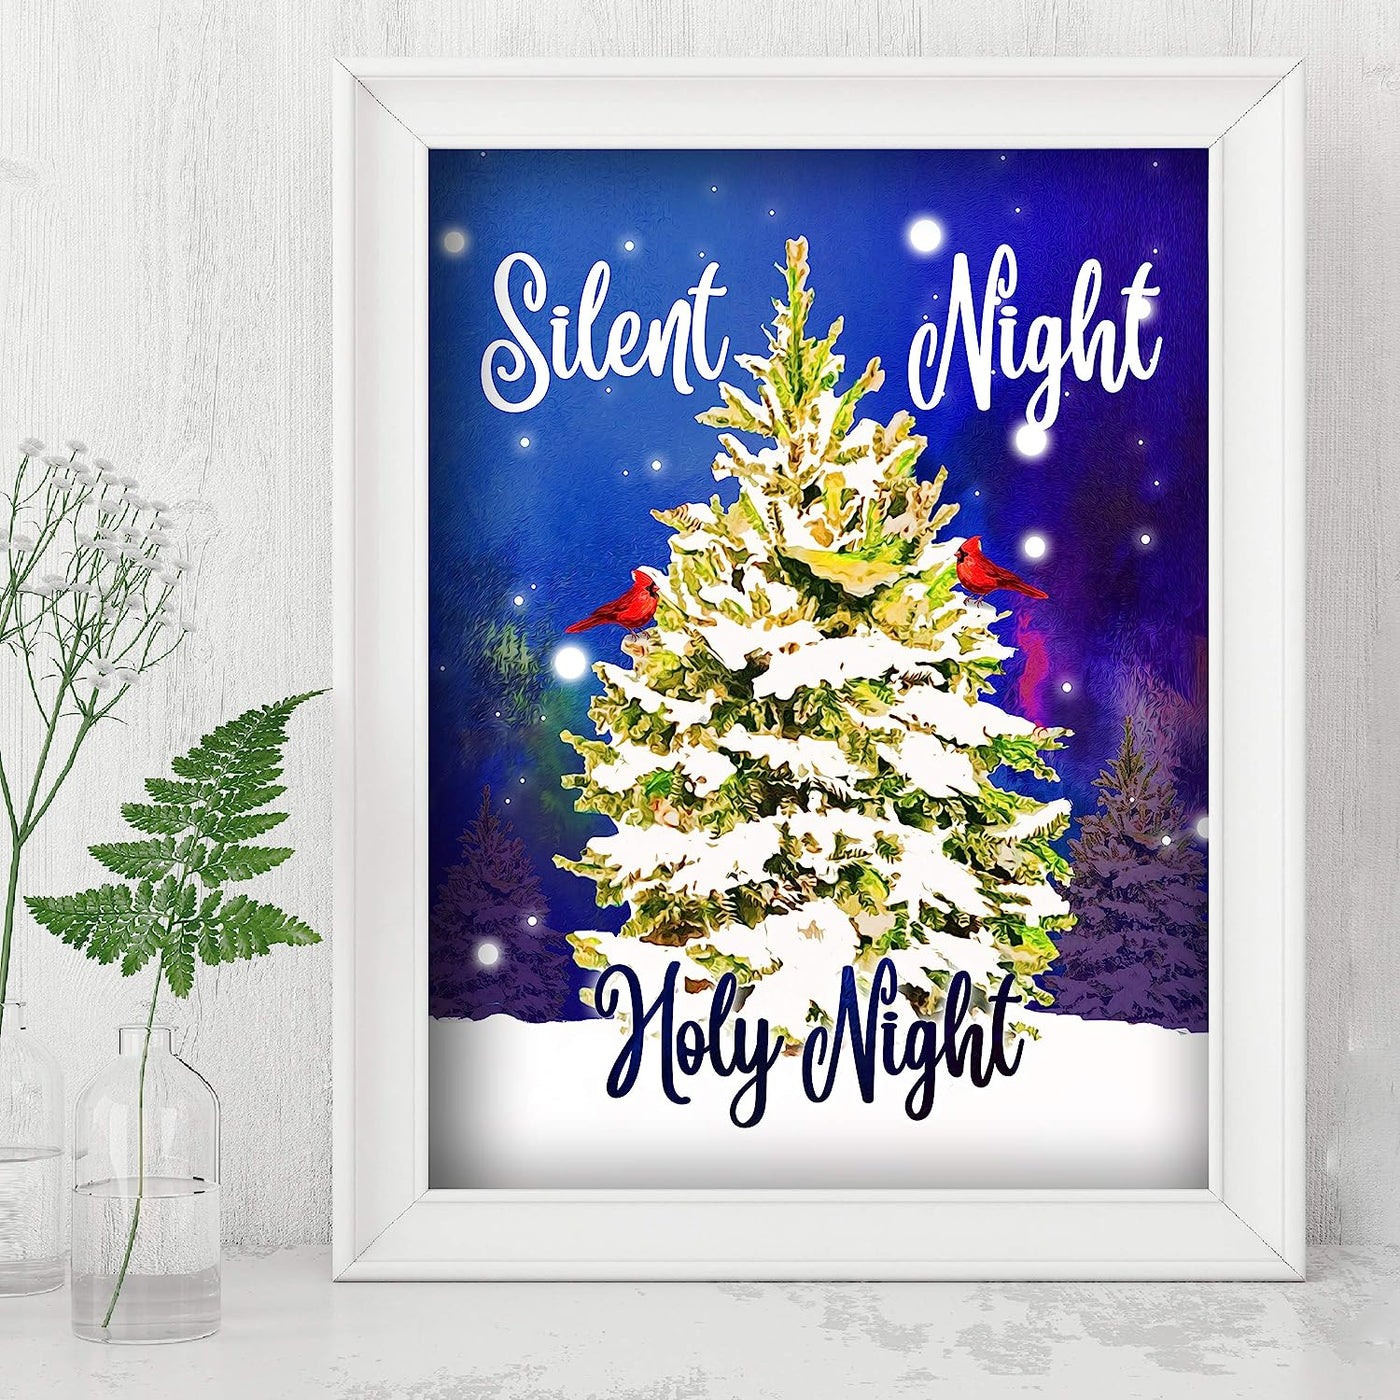 Silent Night-Holy Night Christmas Song Wall Art-8x10" Modern Holiday Music Print w/Cardinals in Tree-Ready to Frame. Home-Kitchen-Farmhouse-Winter Decor. Perfect Welcome Sign! Great Christian Gift!